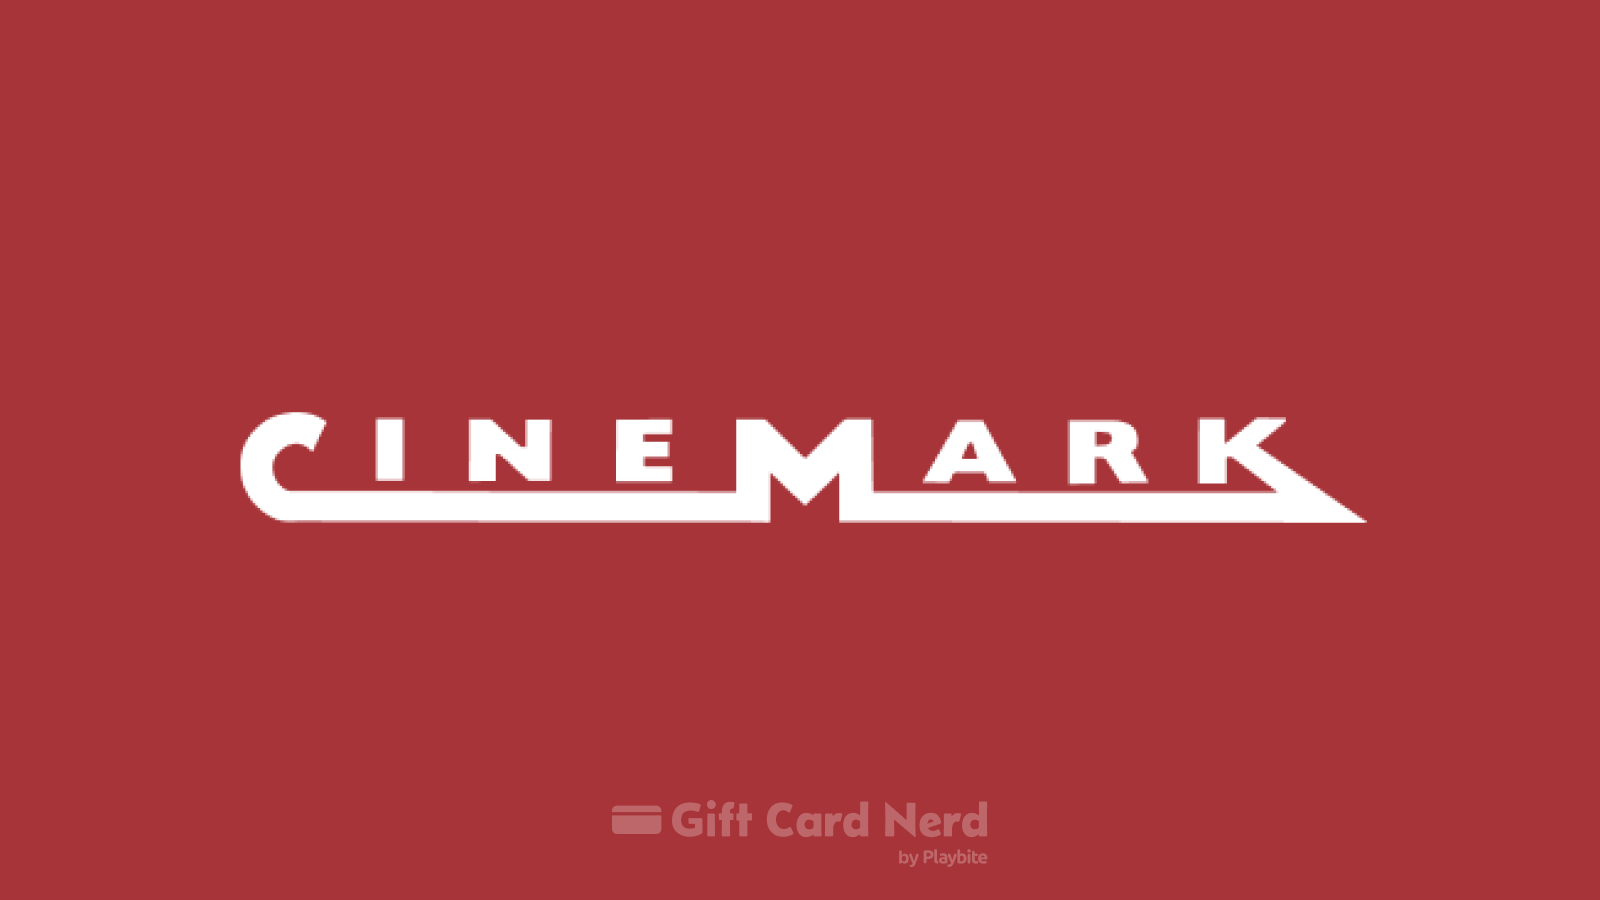 Can You Use a Cinemark Gift Card on Steam?